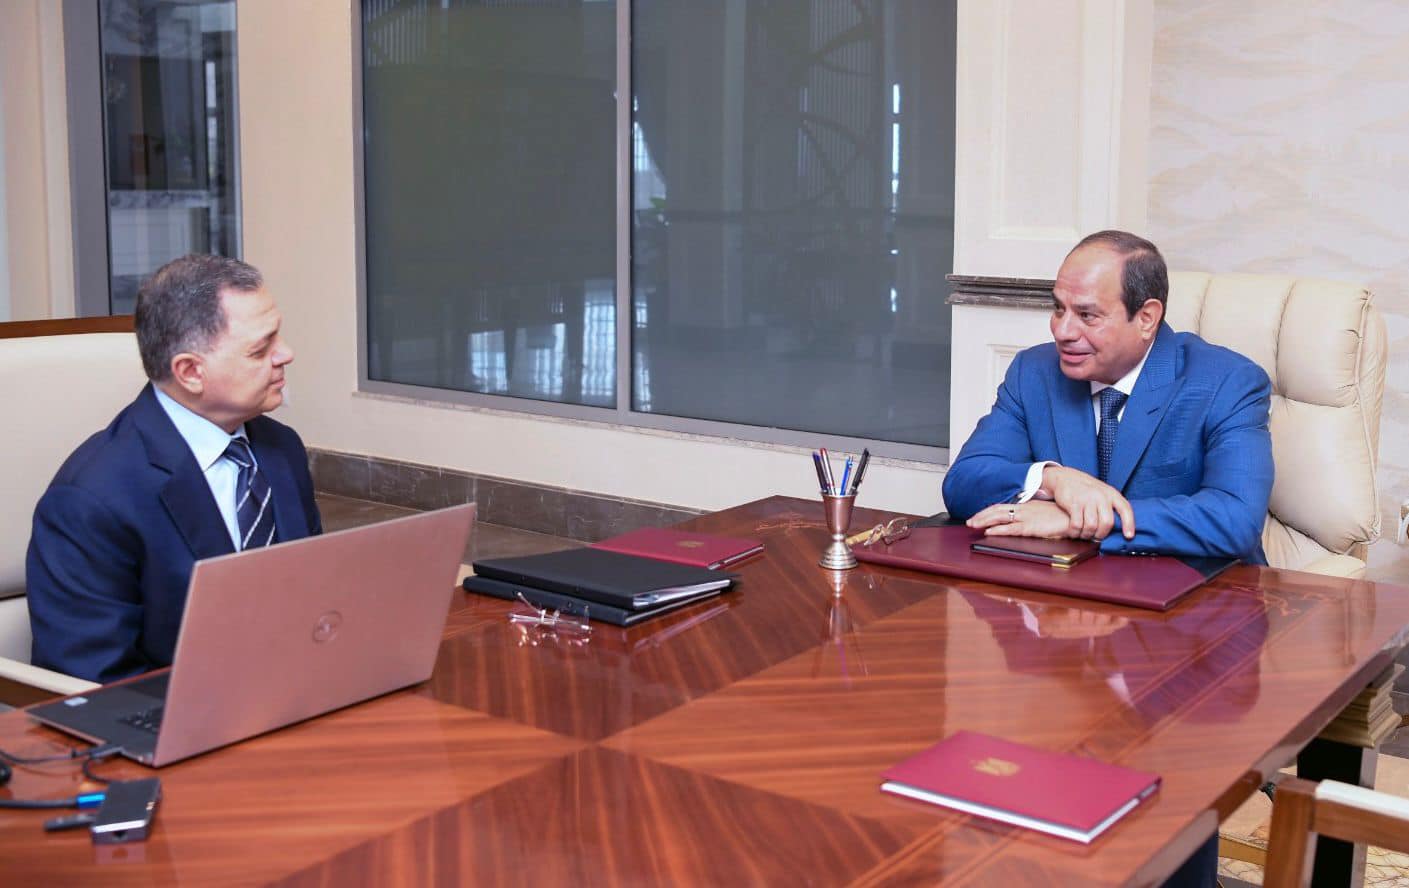 President Sisi meets today with Major General Mahmoud Tawfiq, Minister of Interior